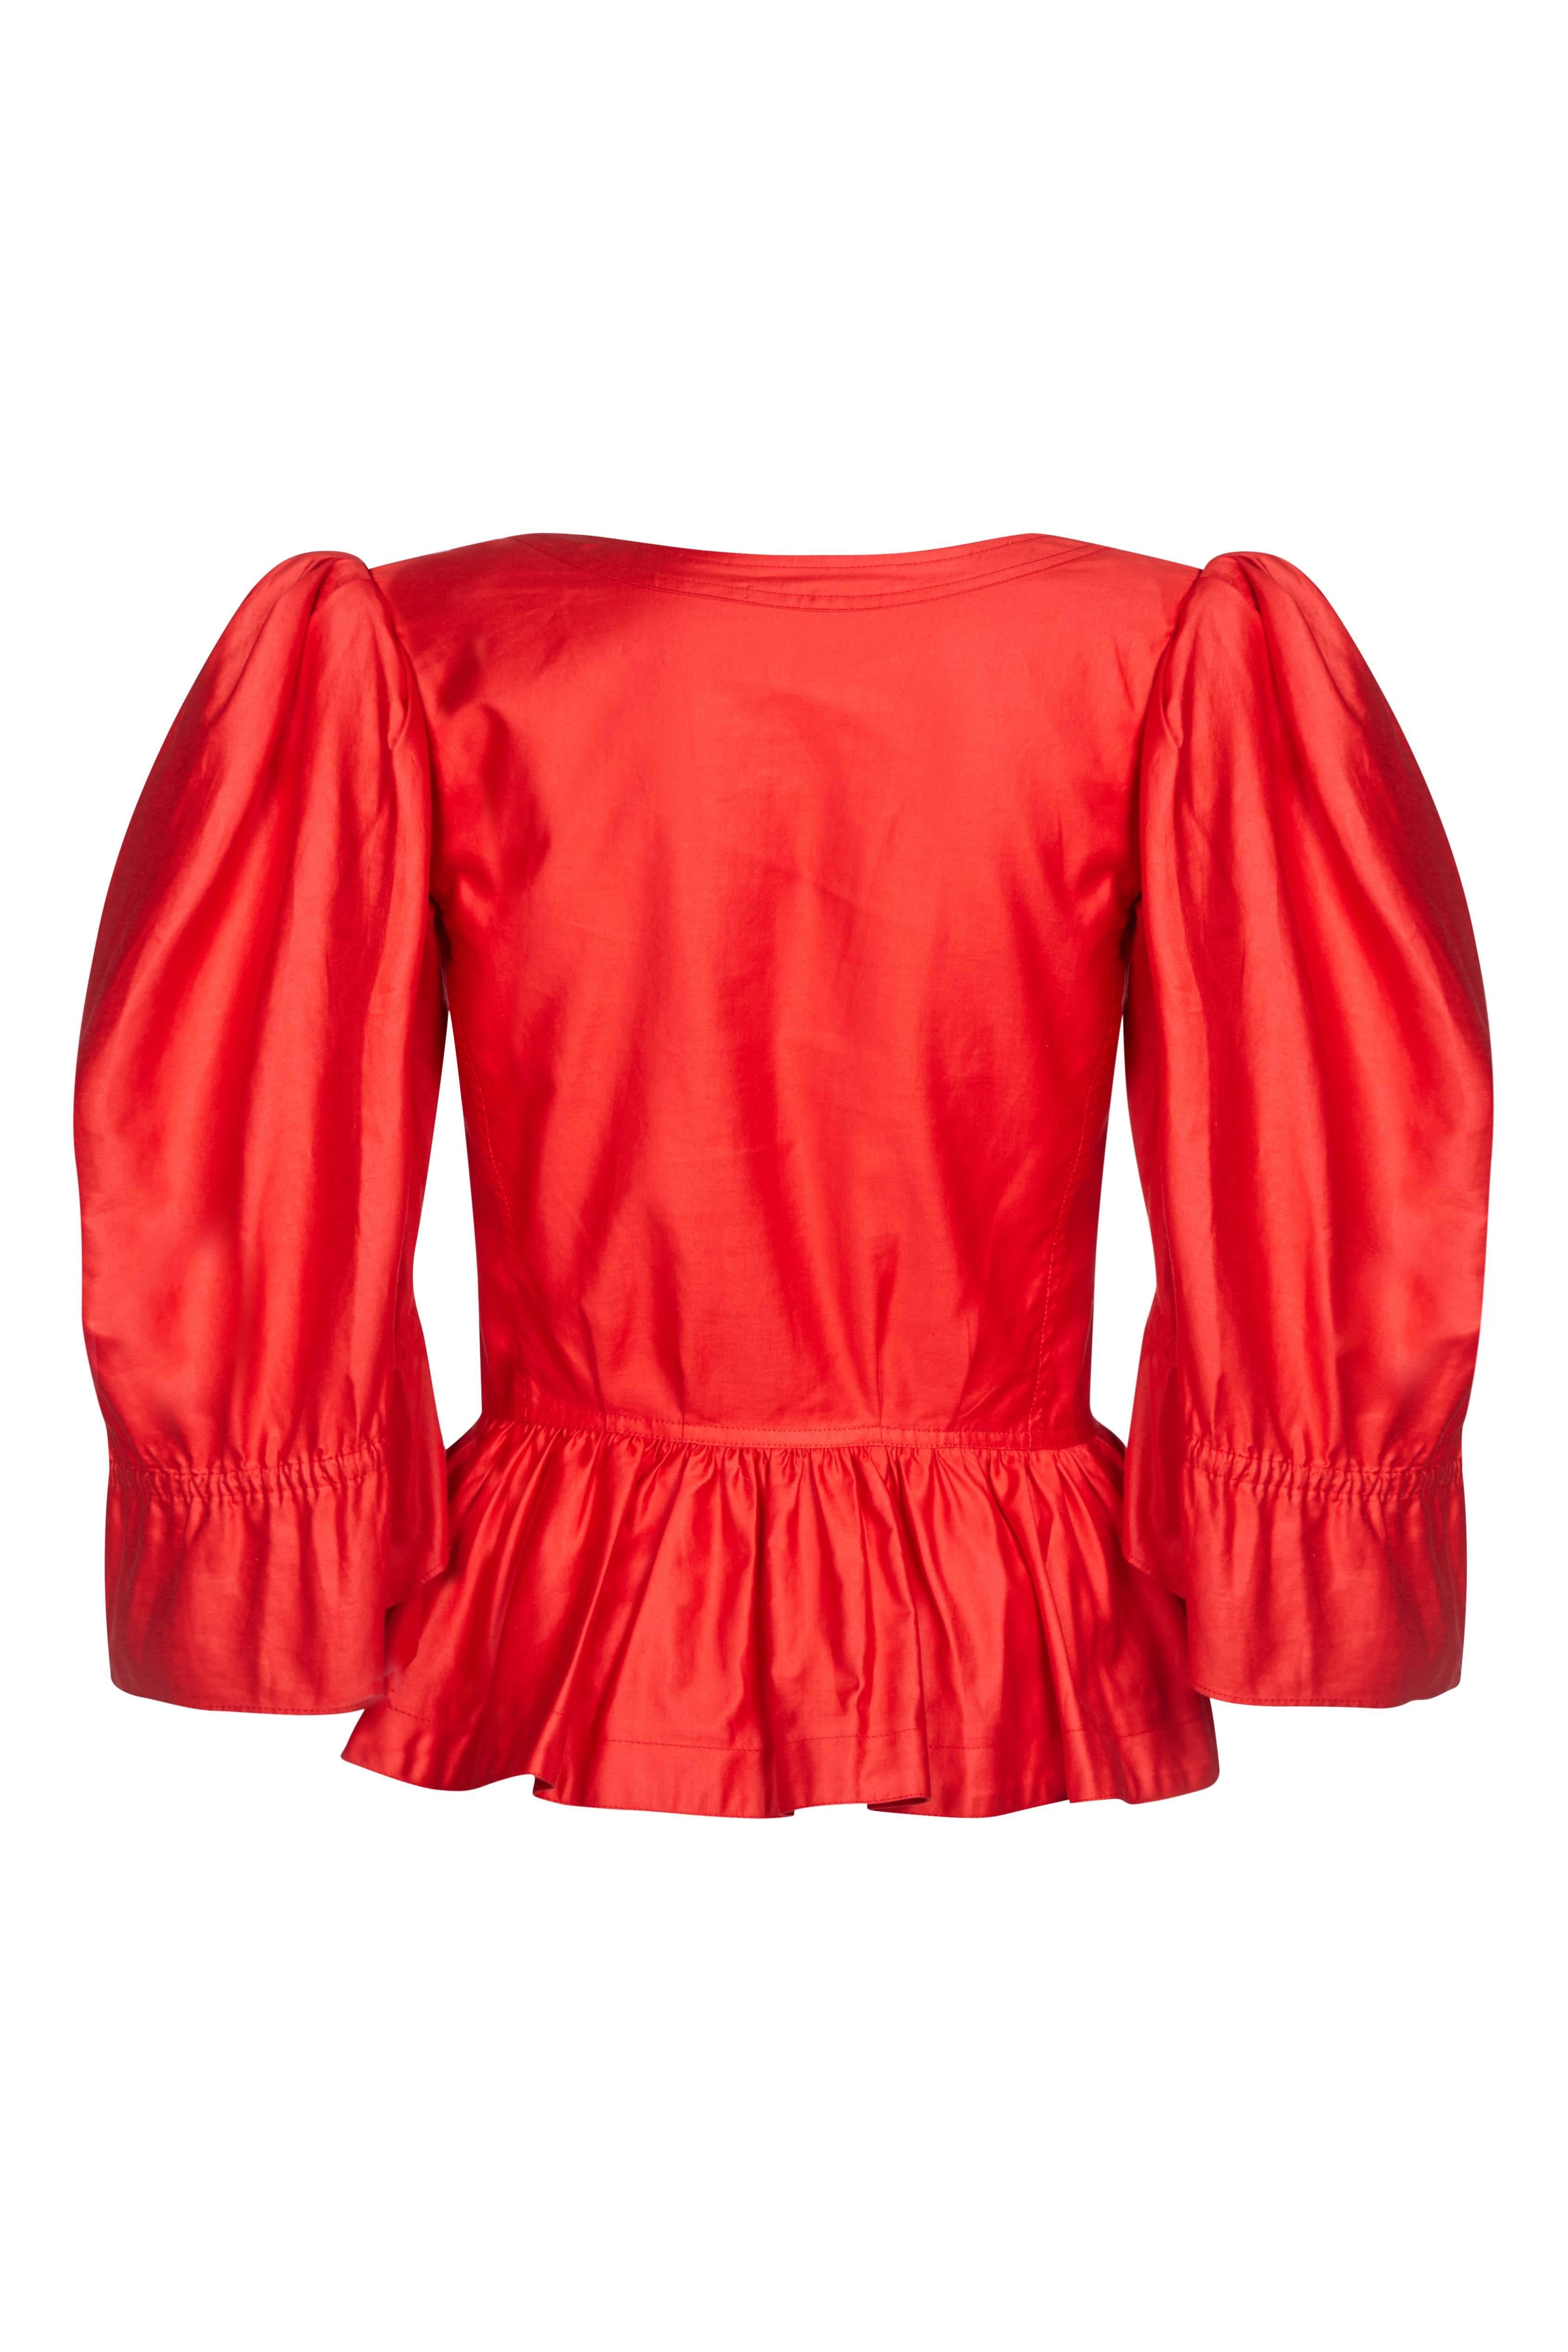 This vibrant 1970s Yves Saint Laurent red polished cotton blouse is guaranteed to turn heads. The deep red colour, bold puff shoulder feature, lavish bell sleeves and peplum detail makes this something of a statement piece. The bodice is beautifully